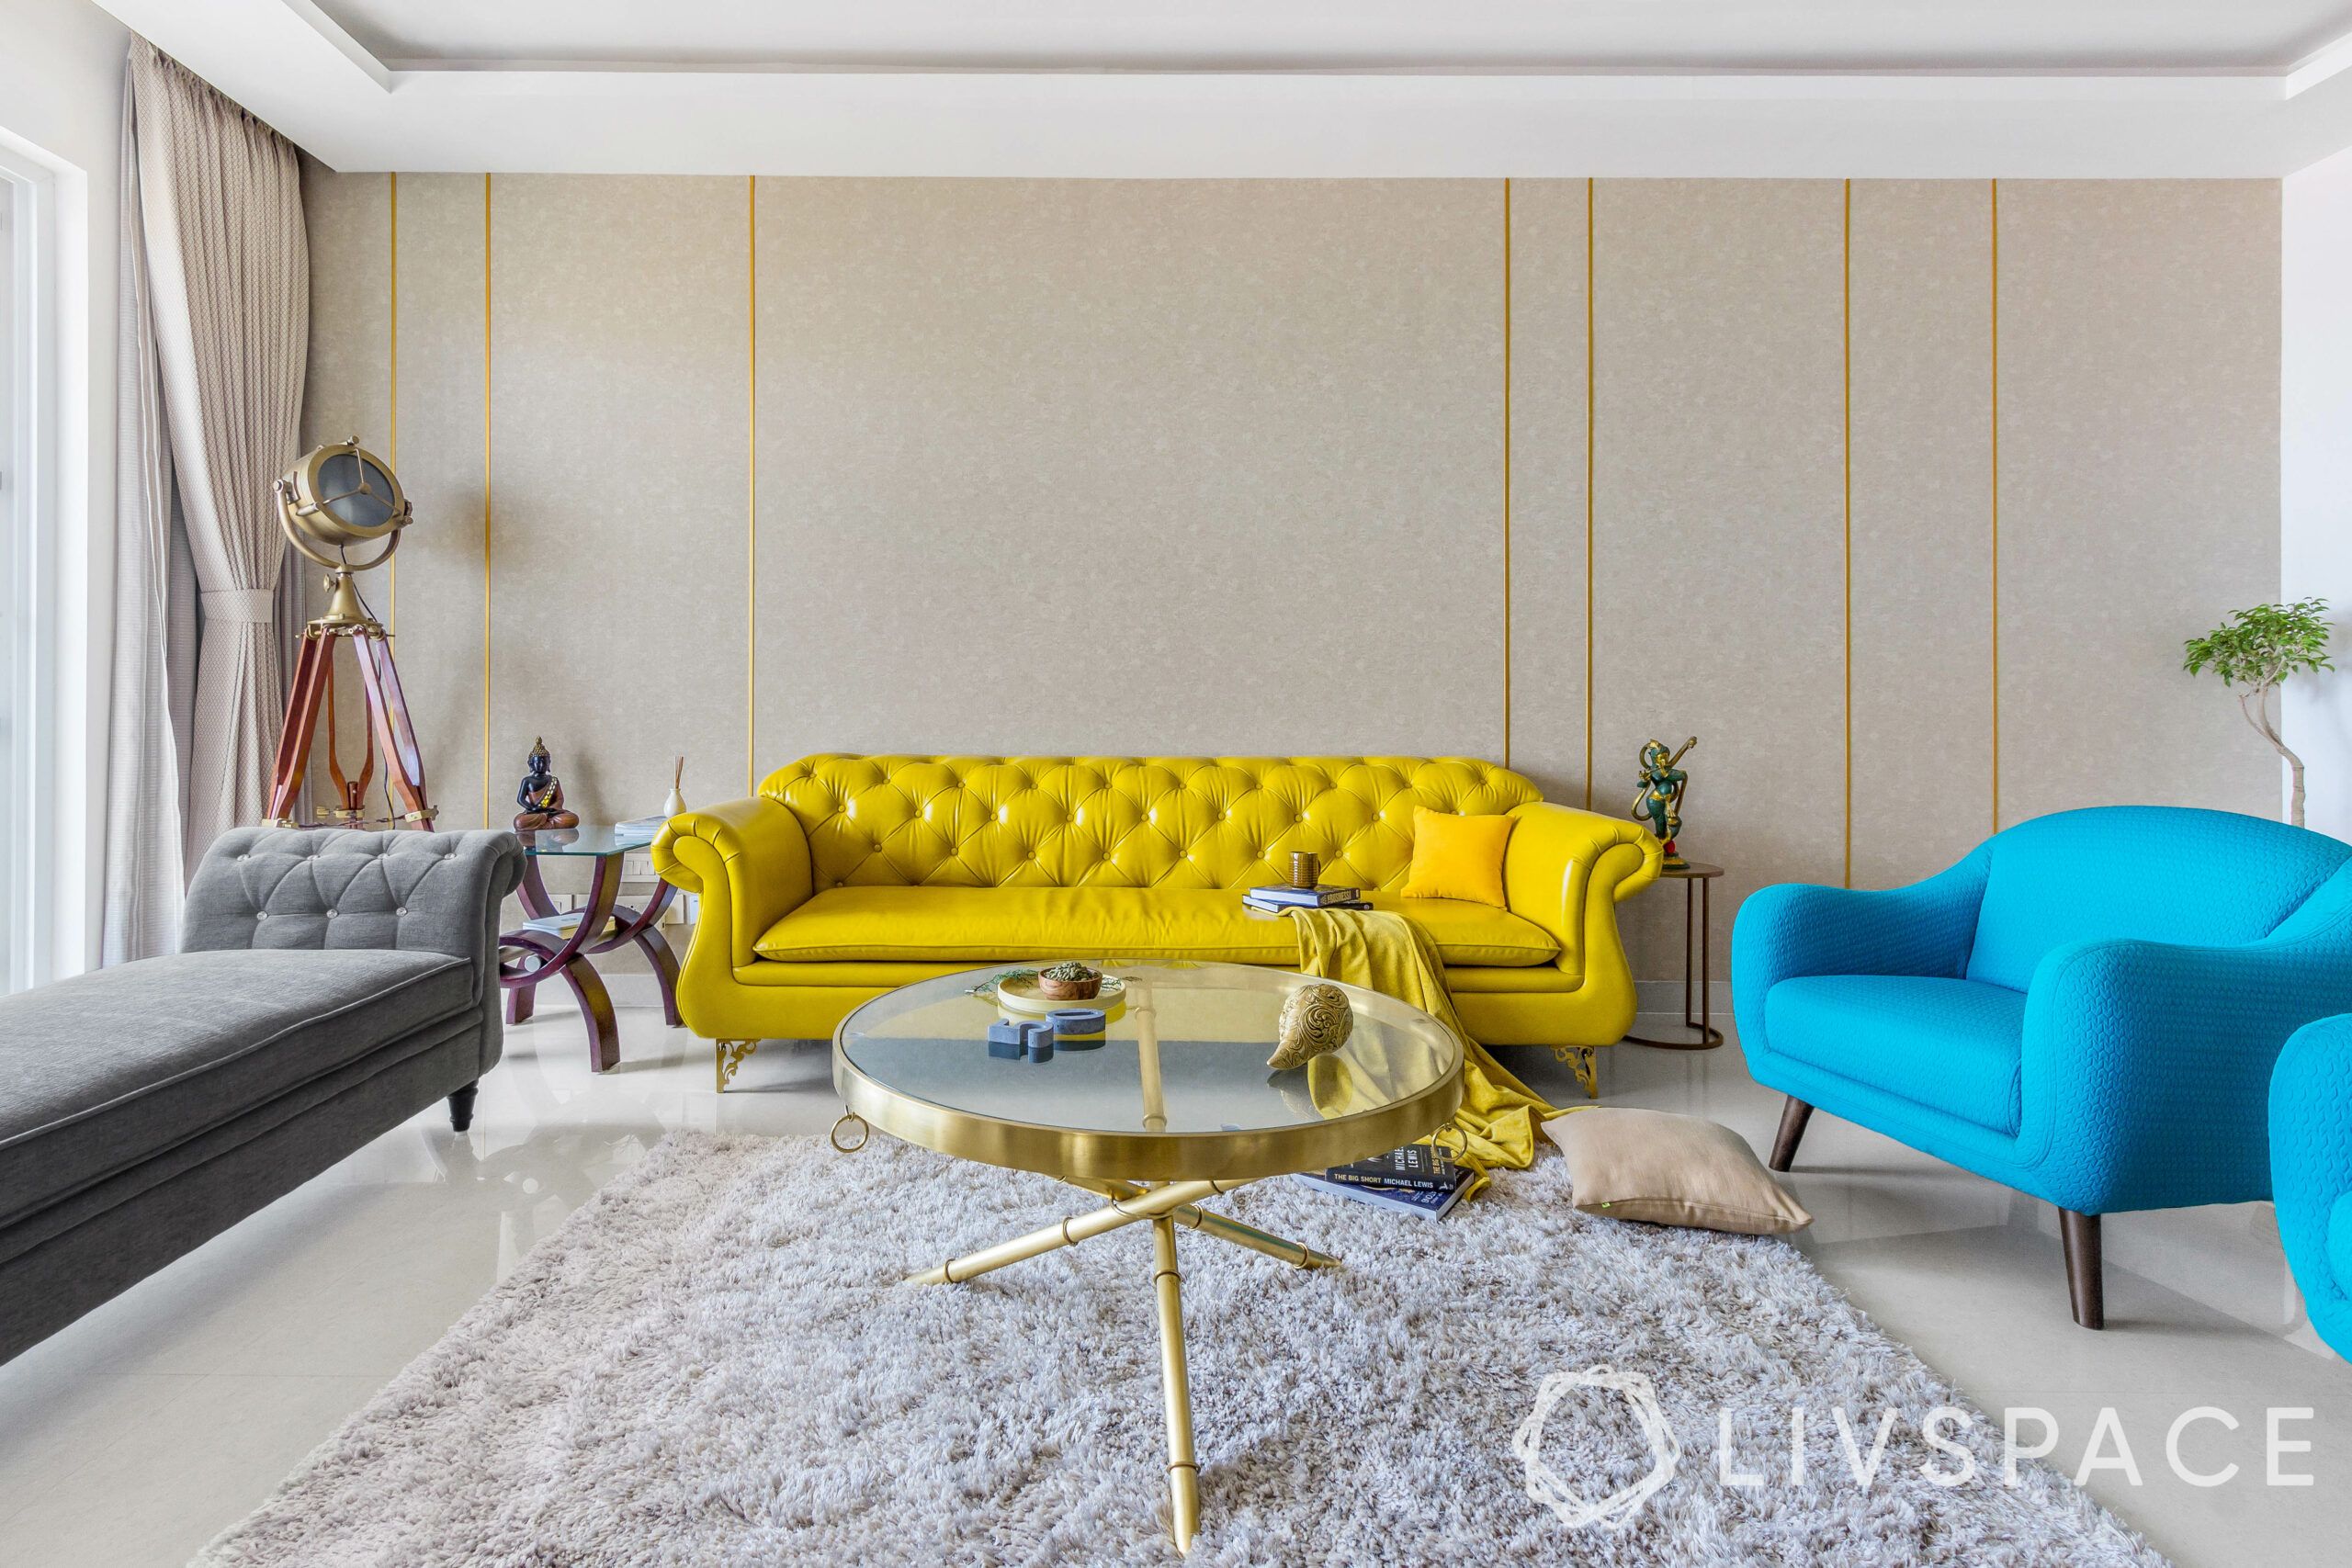 leather furniture-yellow-leatherette-living room